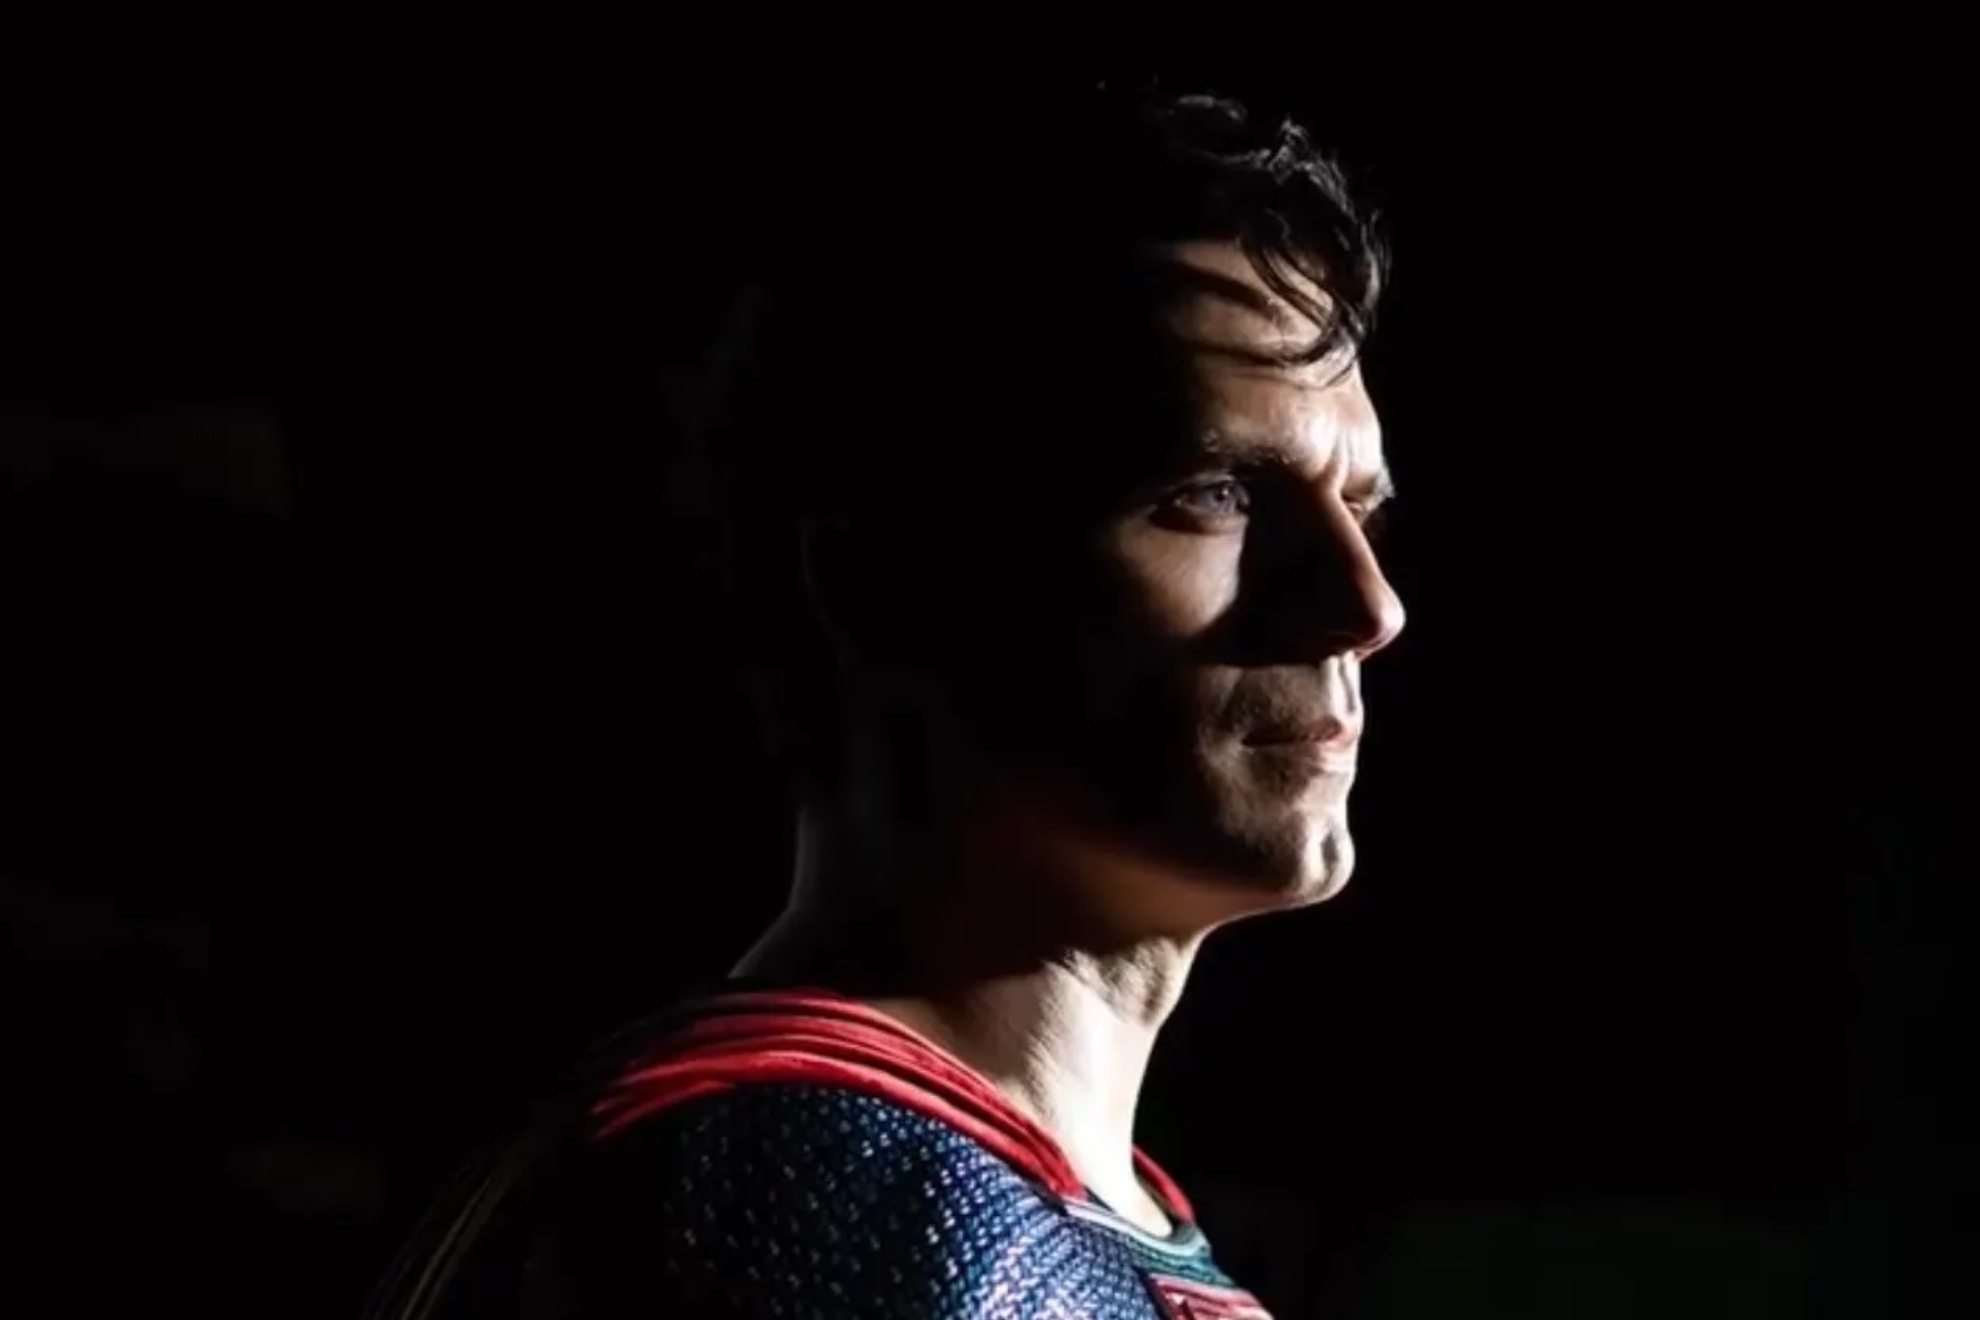 Henry Cavill Will No Longer Play Superman, As DC Focuses on